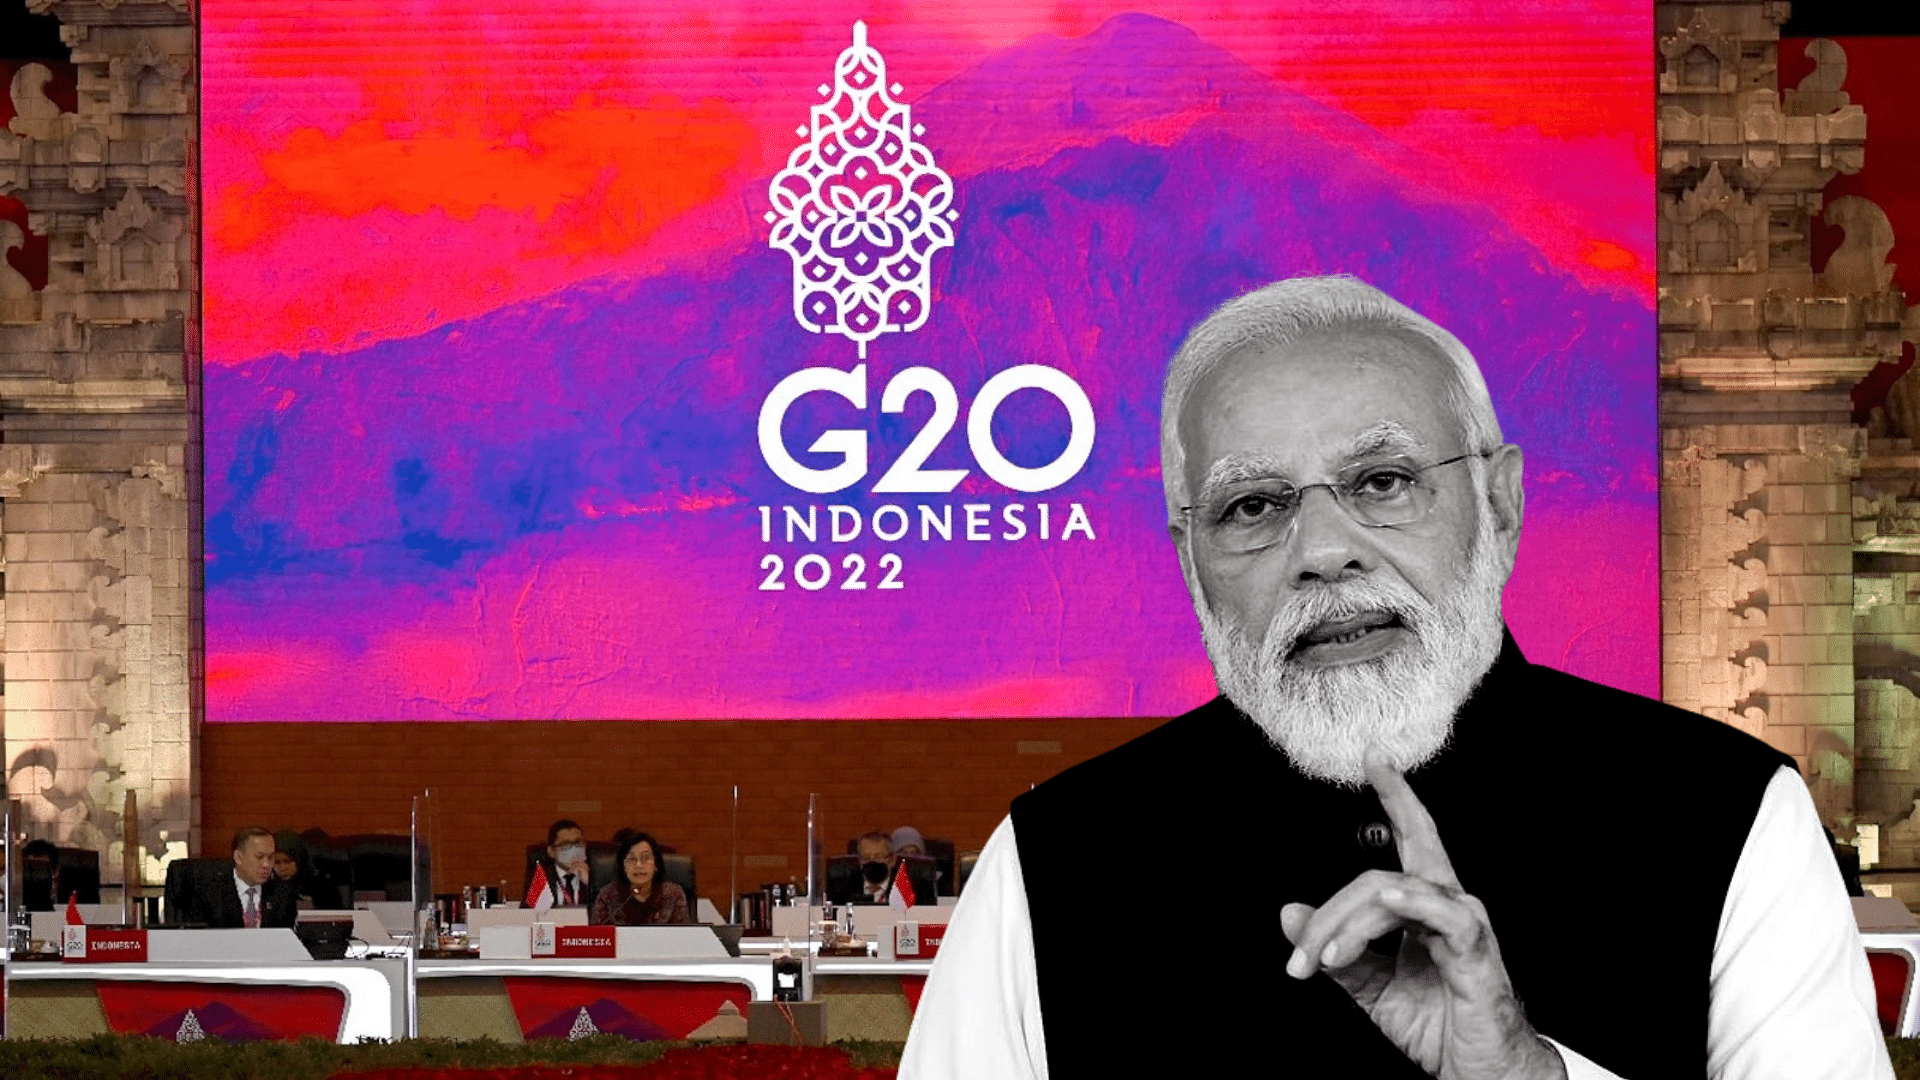 <div class="paragraphs"><p>On Tuesday, 15 November, Indian <a href="https://www.thequint.com/topic/prime-minister-narendra-modi">Prime Minister Narendra Modi</a>, along with other world leaders, will gather in Bali, Indonesia for the annual <a href="https://www.thequint.com/topic/g20-summit">G20 summit</a>.</p></div>